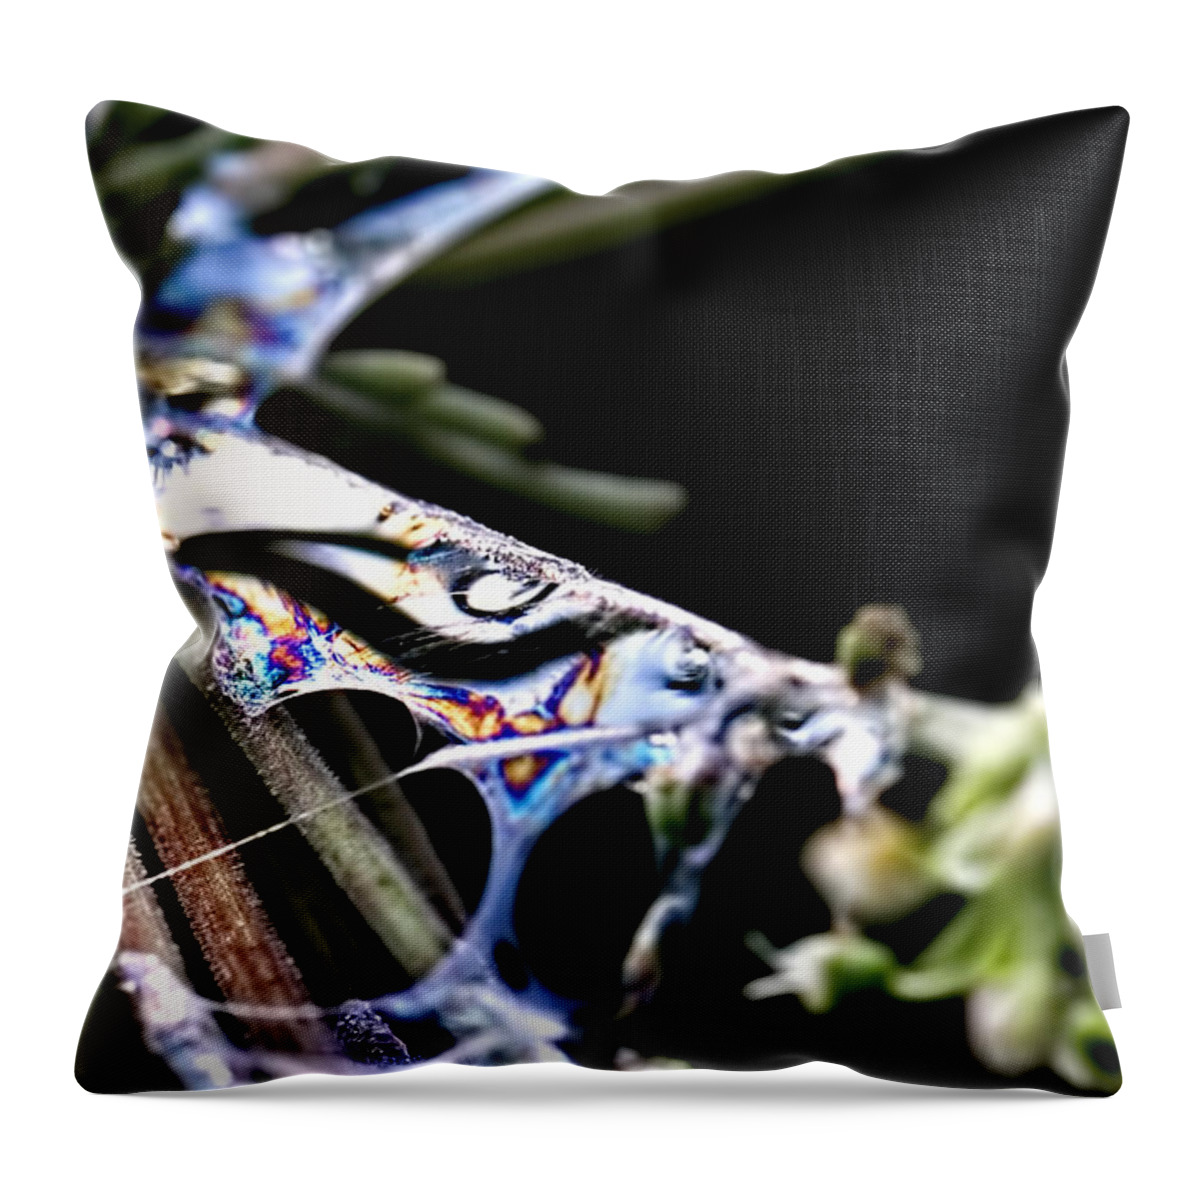 Colours Throw Pillow featuring the photograph Colours by Leif Sohlman